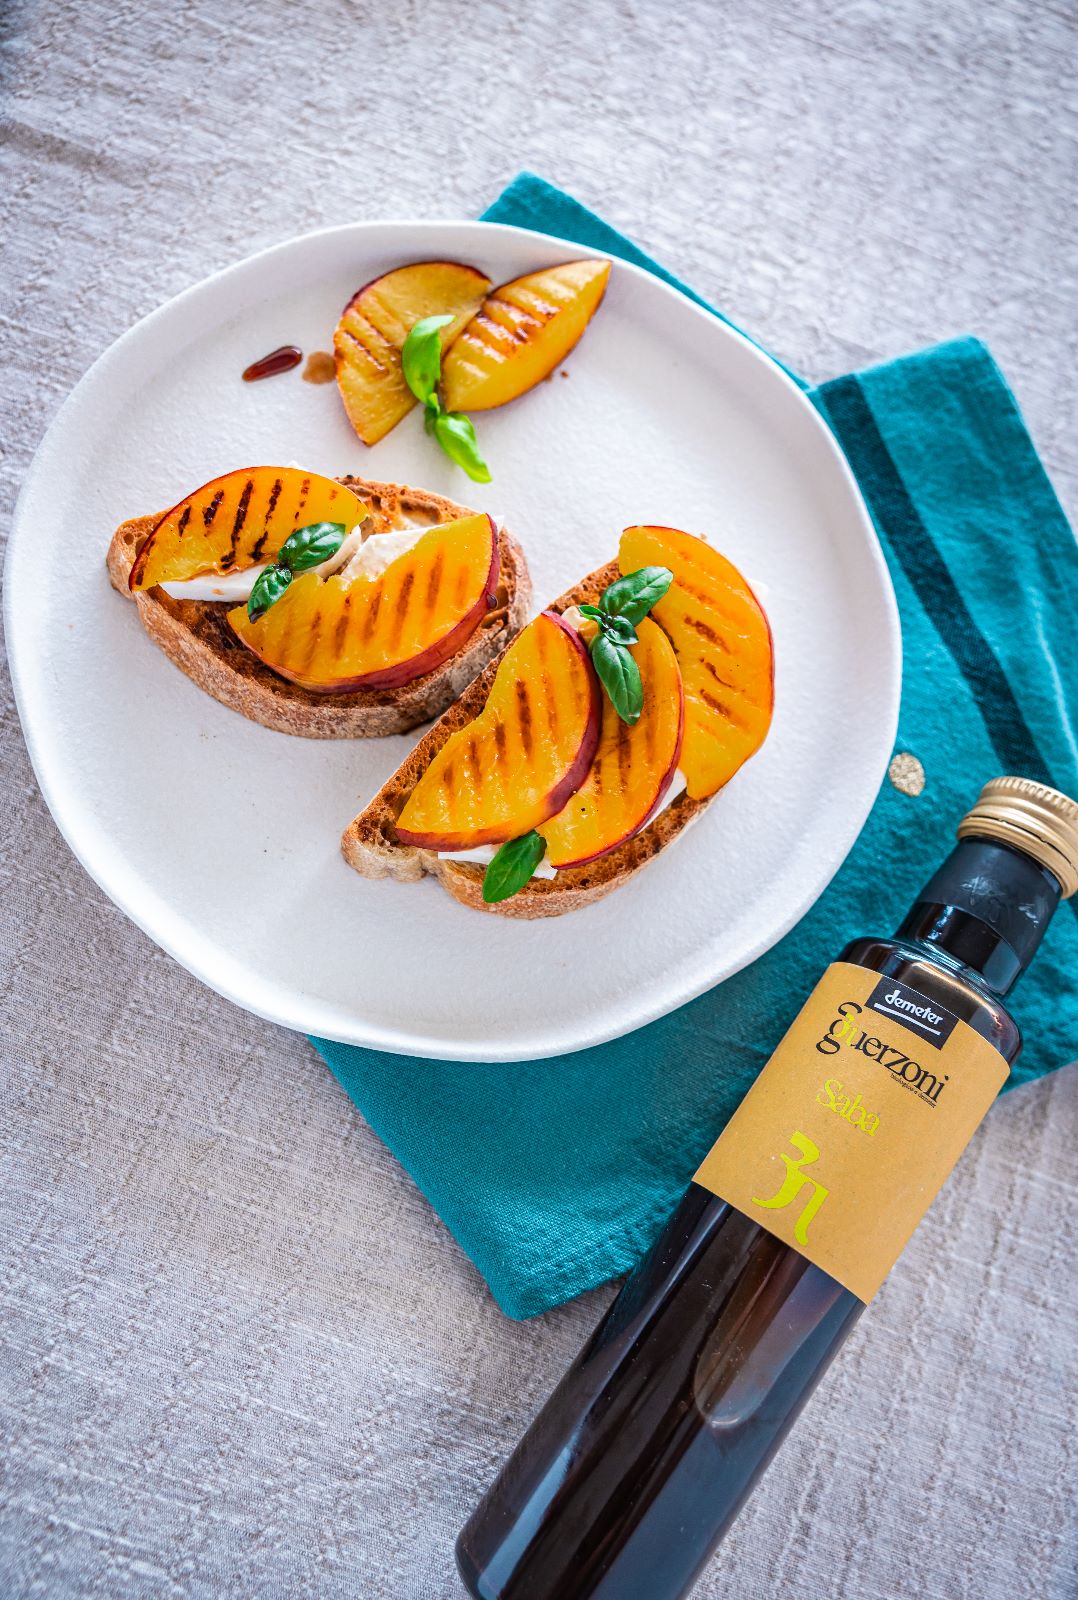 Summer bruschetta with primo sale, grilled peaches and balsamic saba: a symphony of summer flavours!